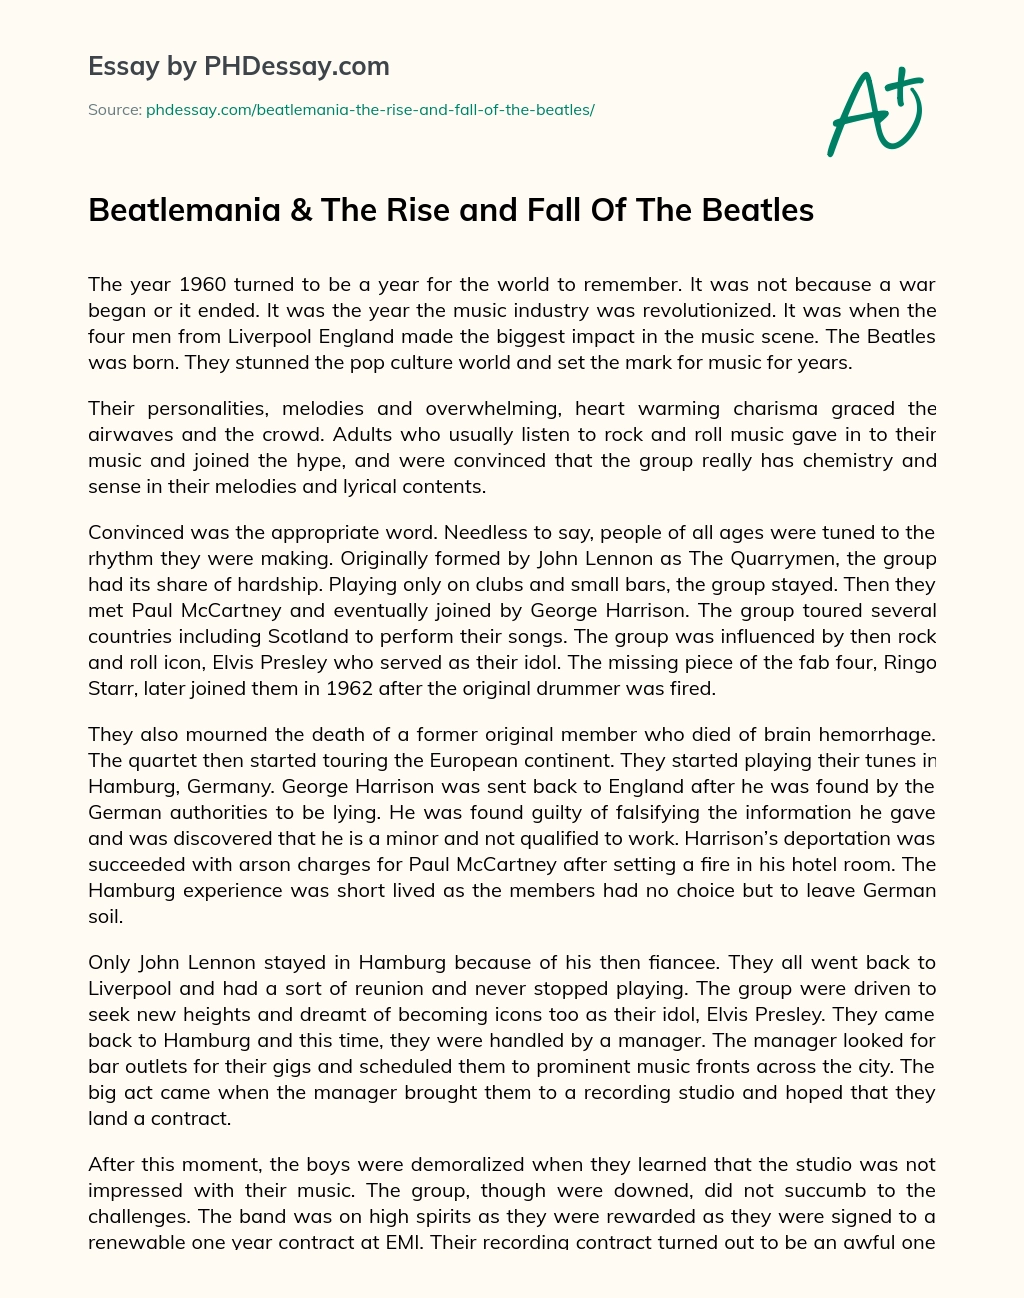 Beatlemania & The Rise and Fall Of The Beatles essay